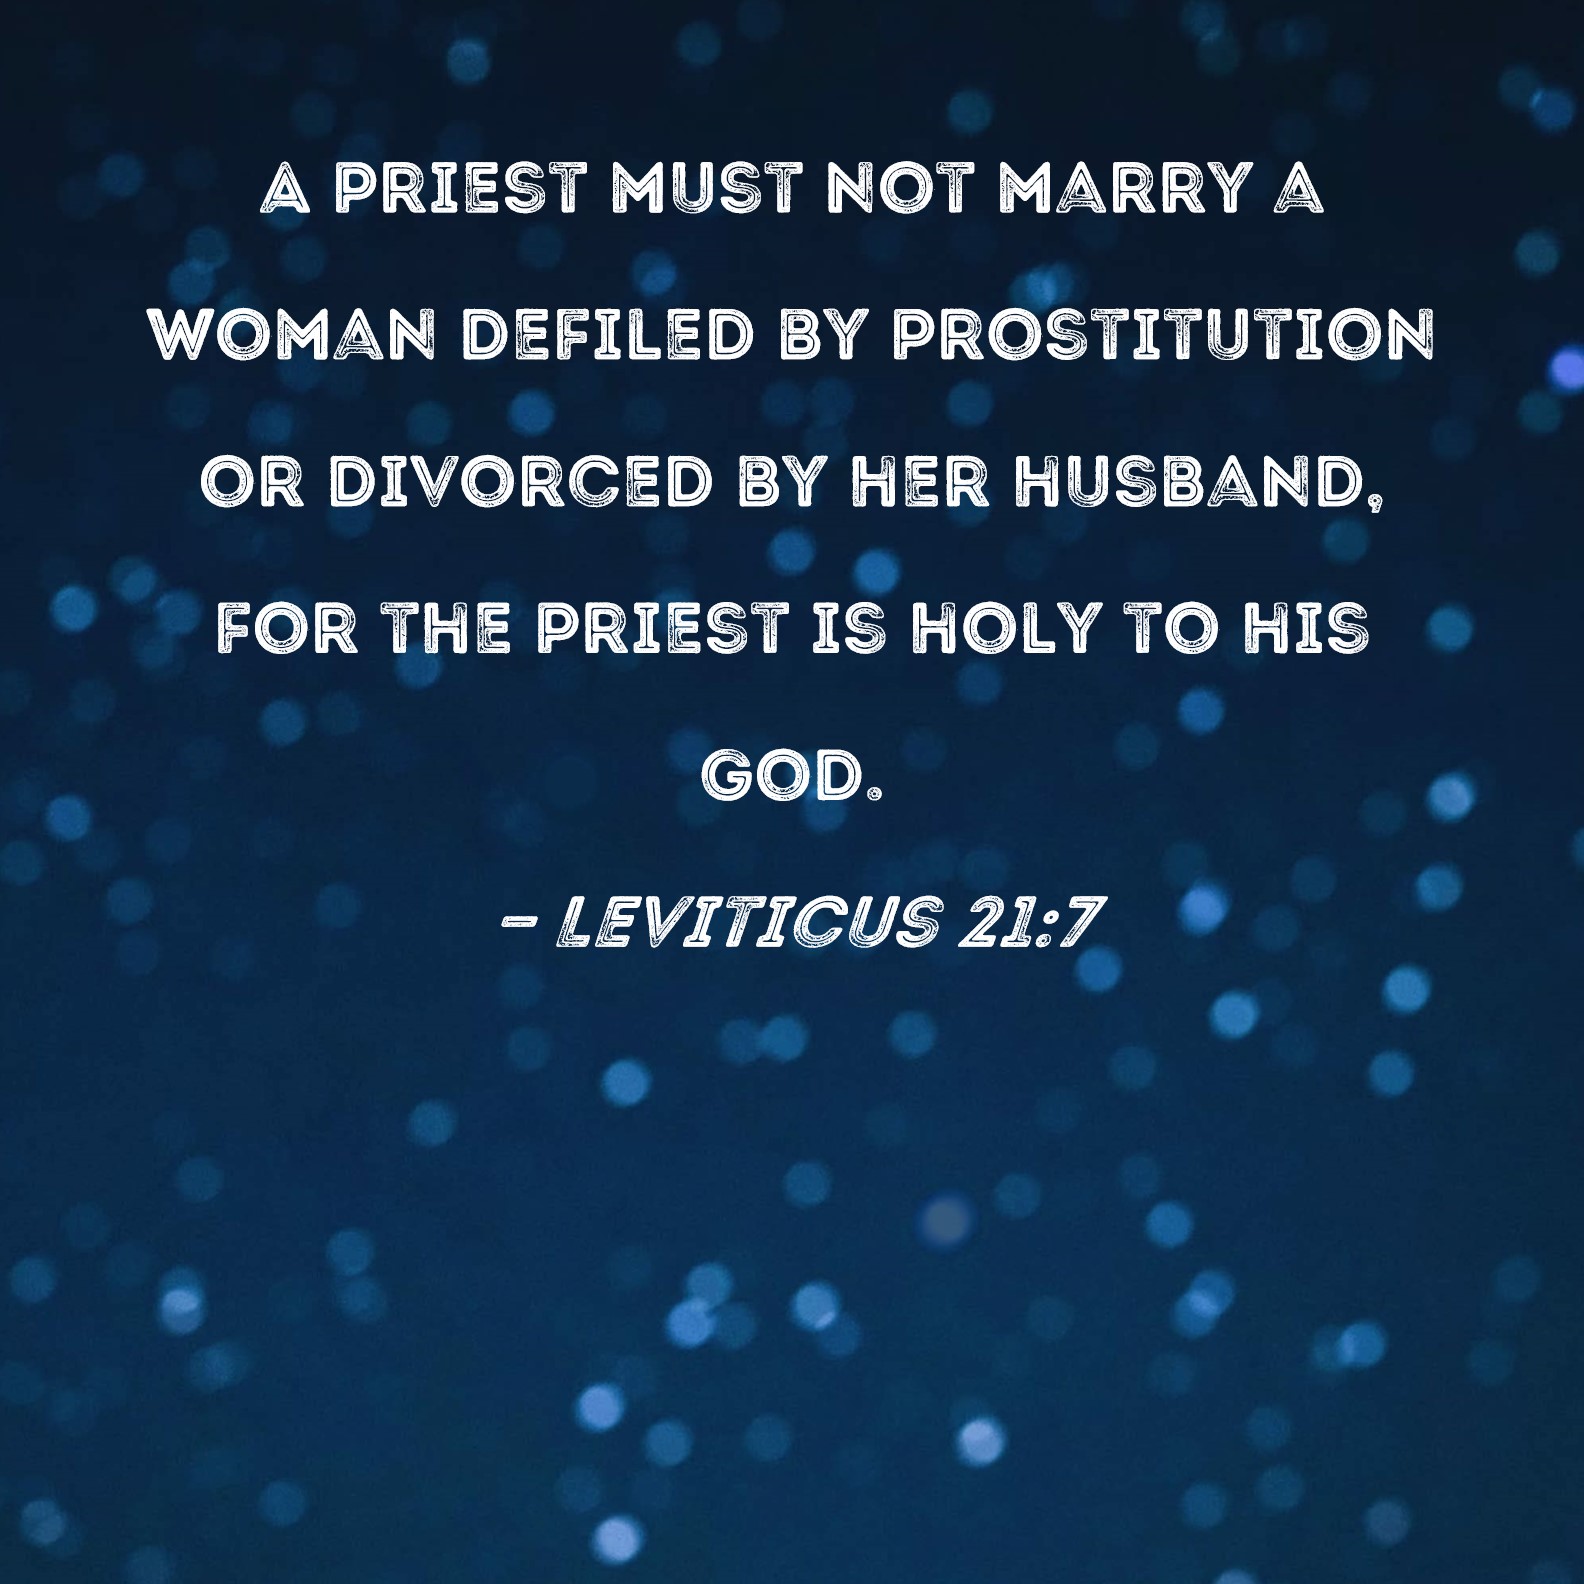 Leviticus 217 A priest must not marry a woman defiled by prostitution or divorced by her husband, for the priest is holy to his God. photo